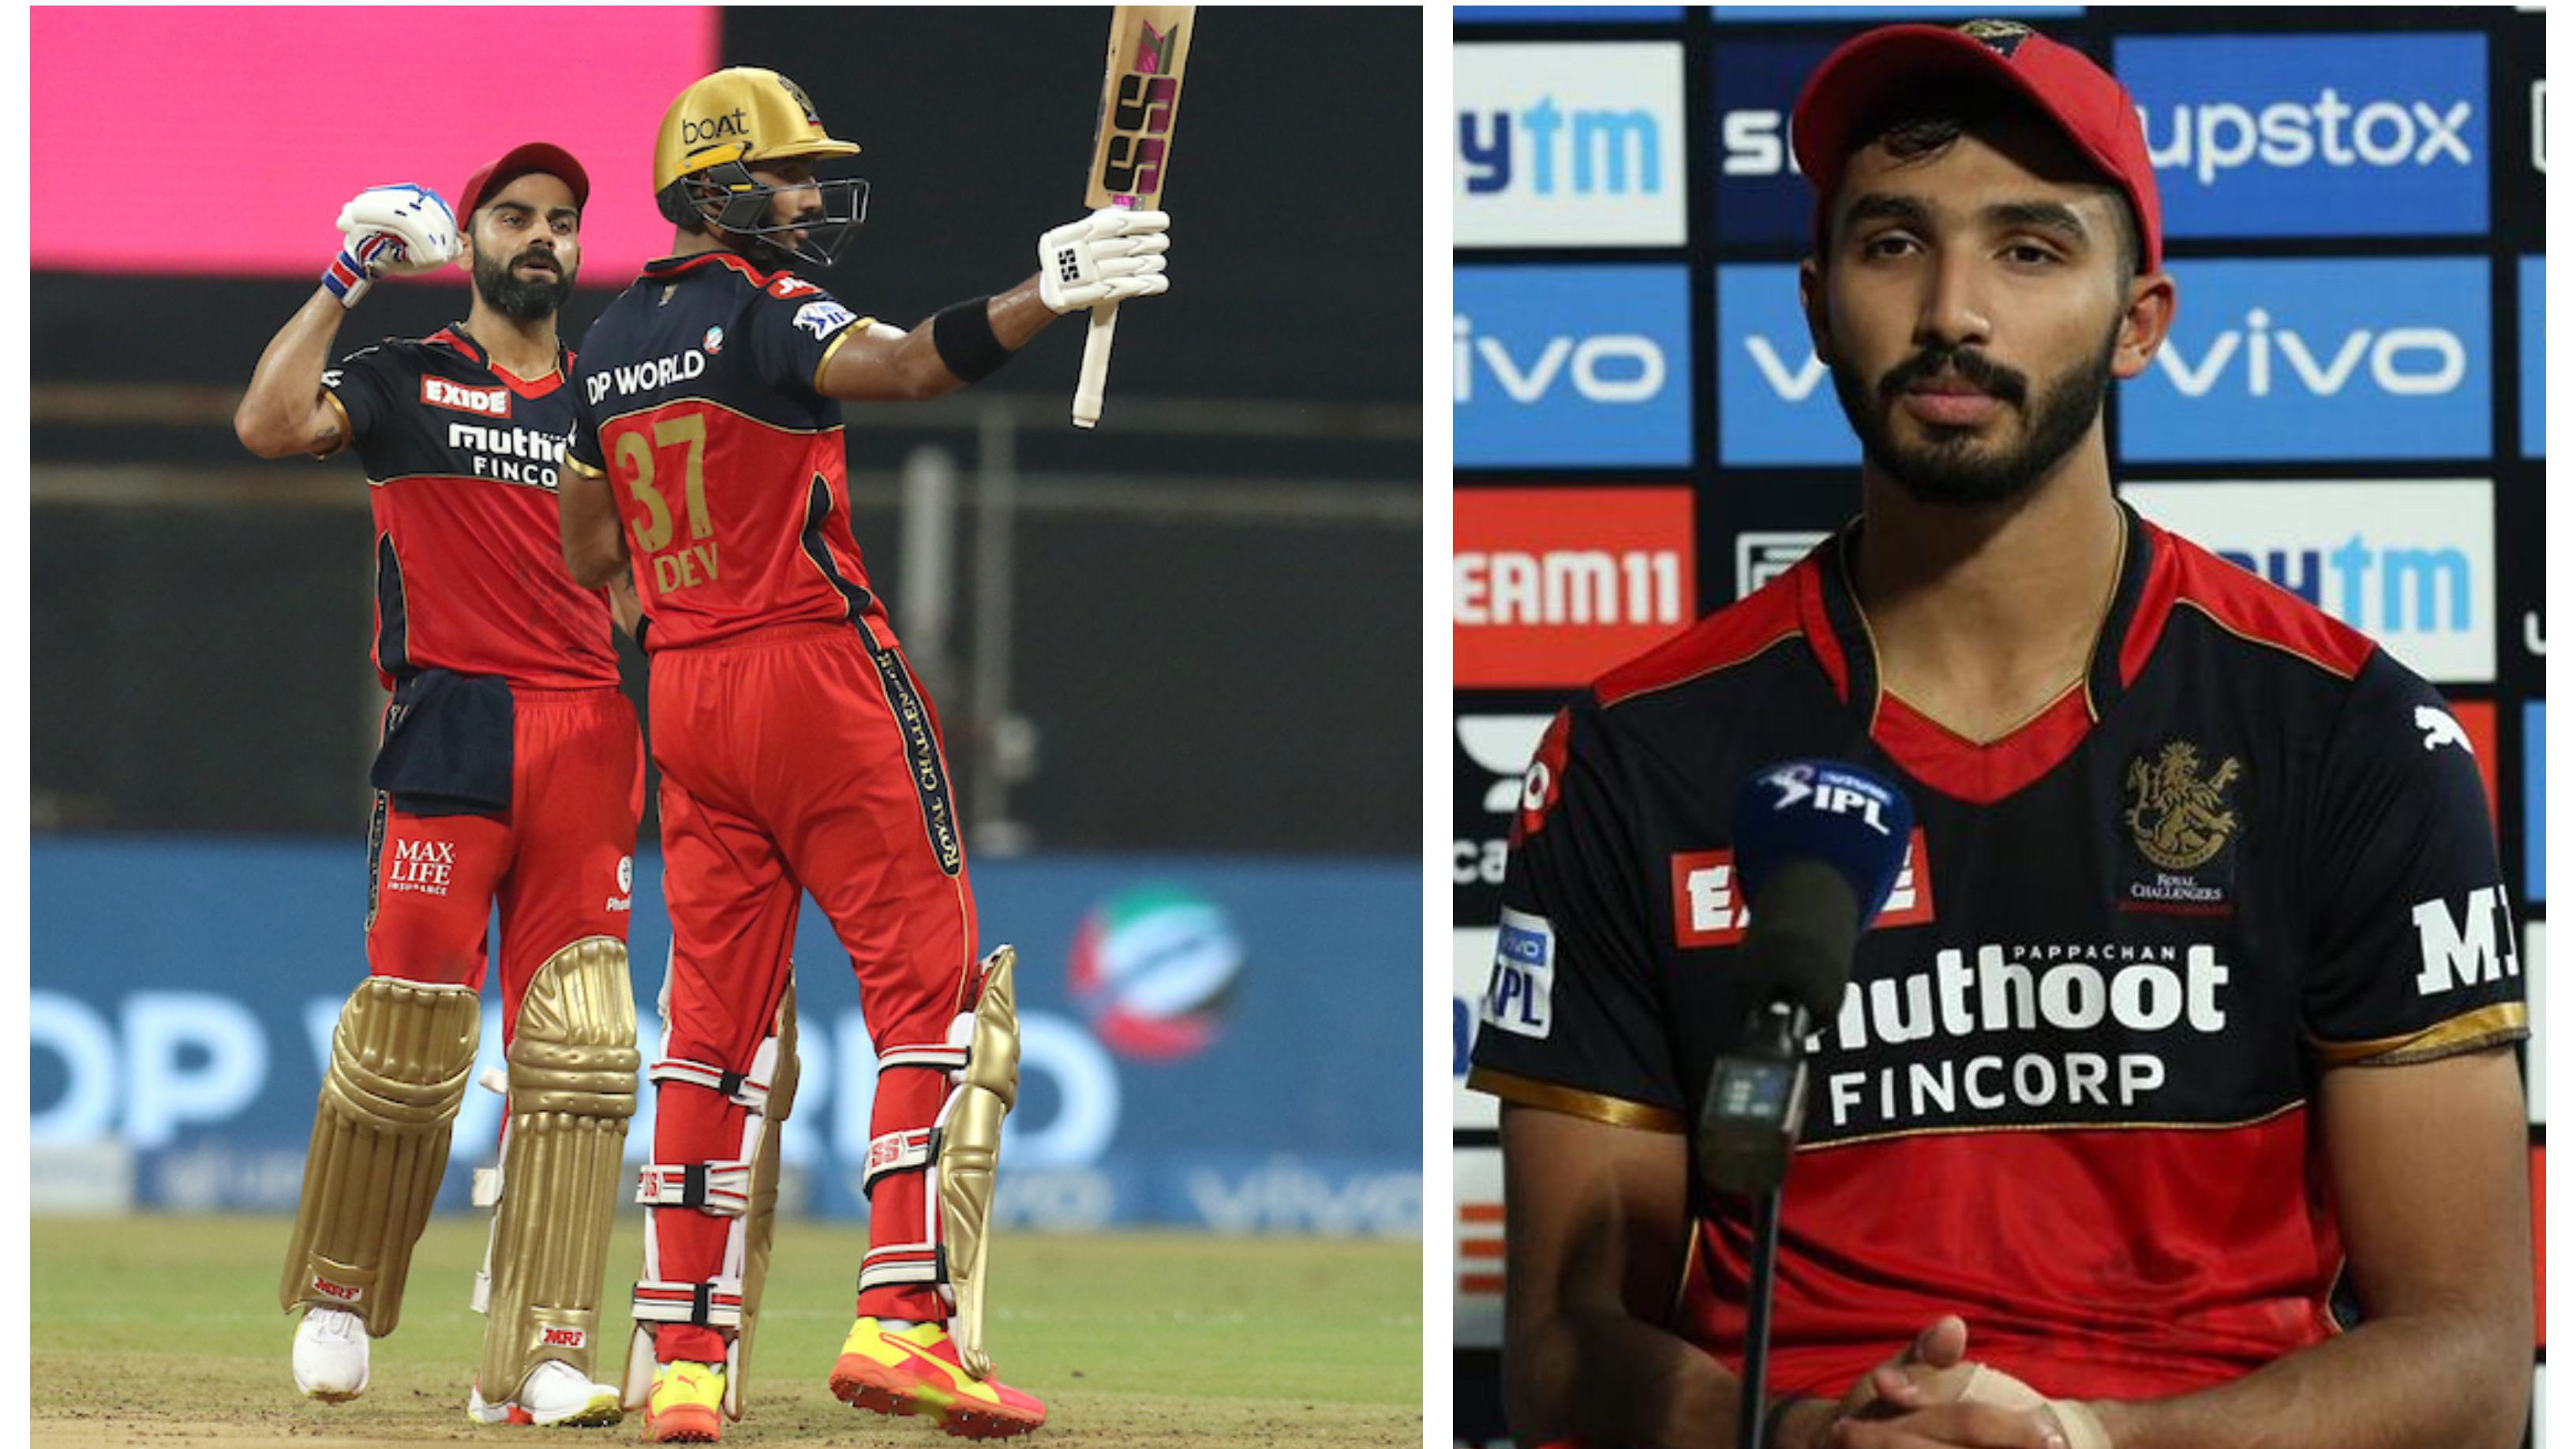 IPL 2021: Devdutt Padikkal reflects on his herculean opening stand with Virat Kohli after RCB’s win over RR